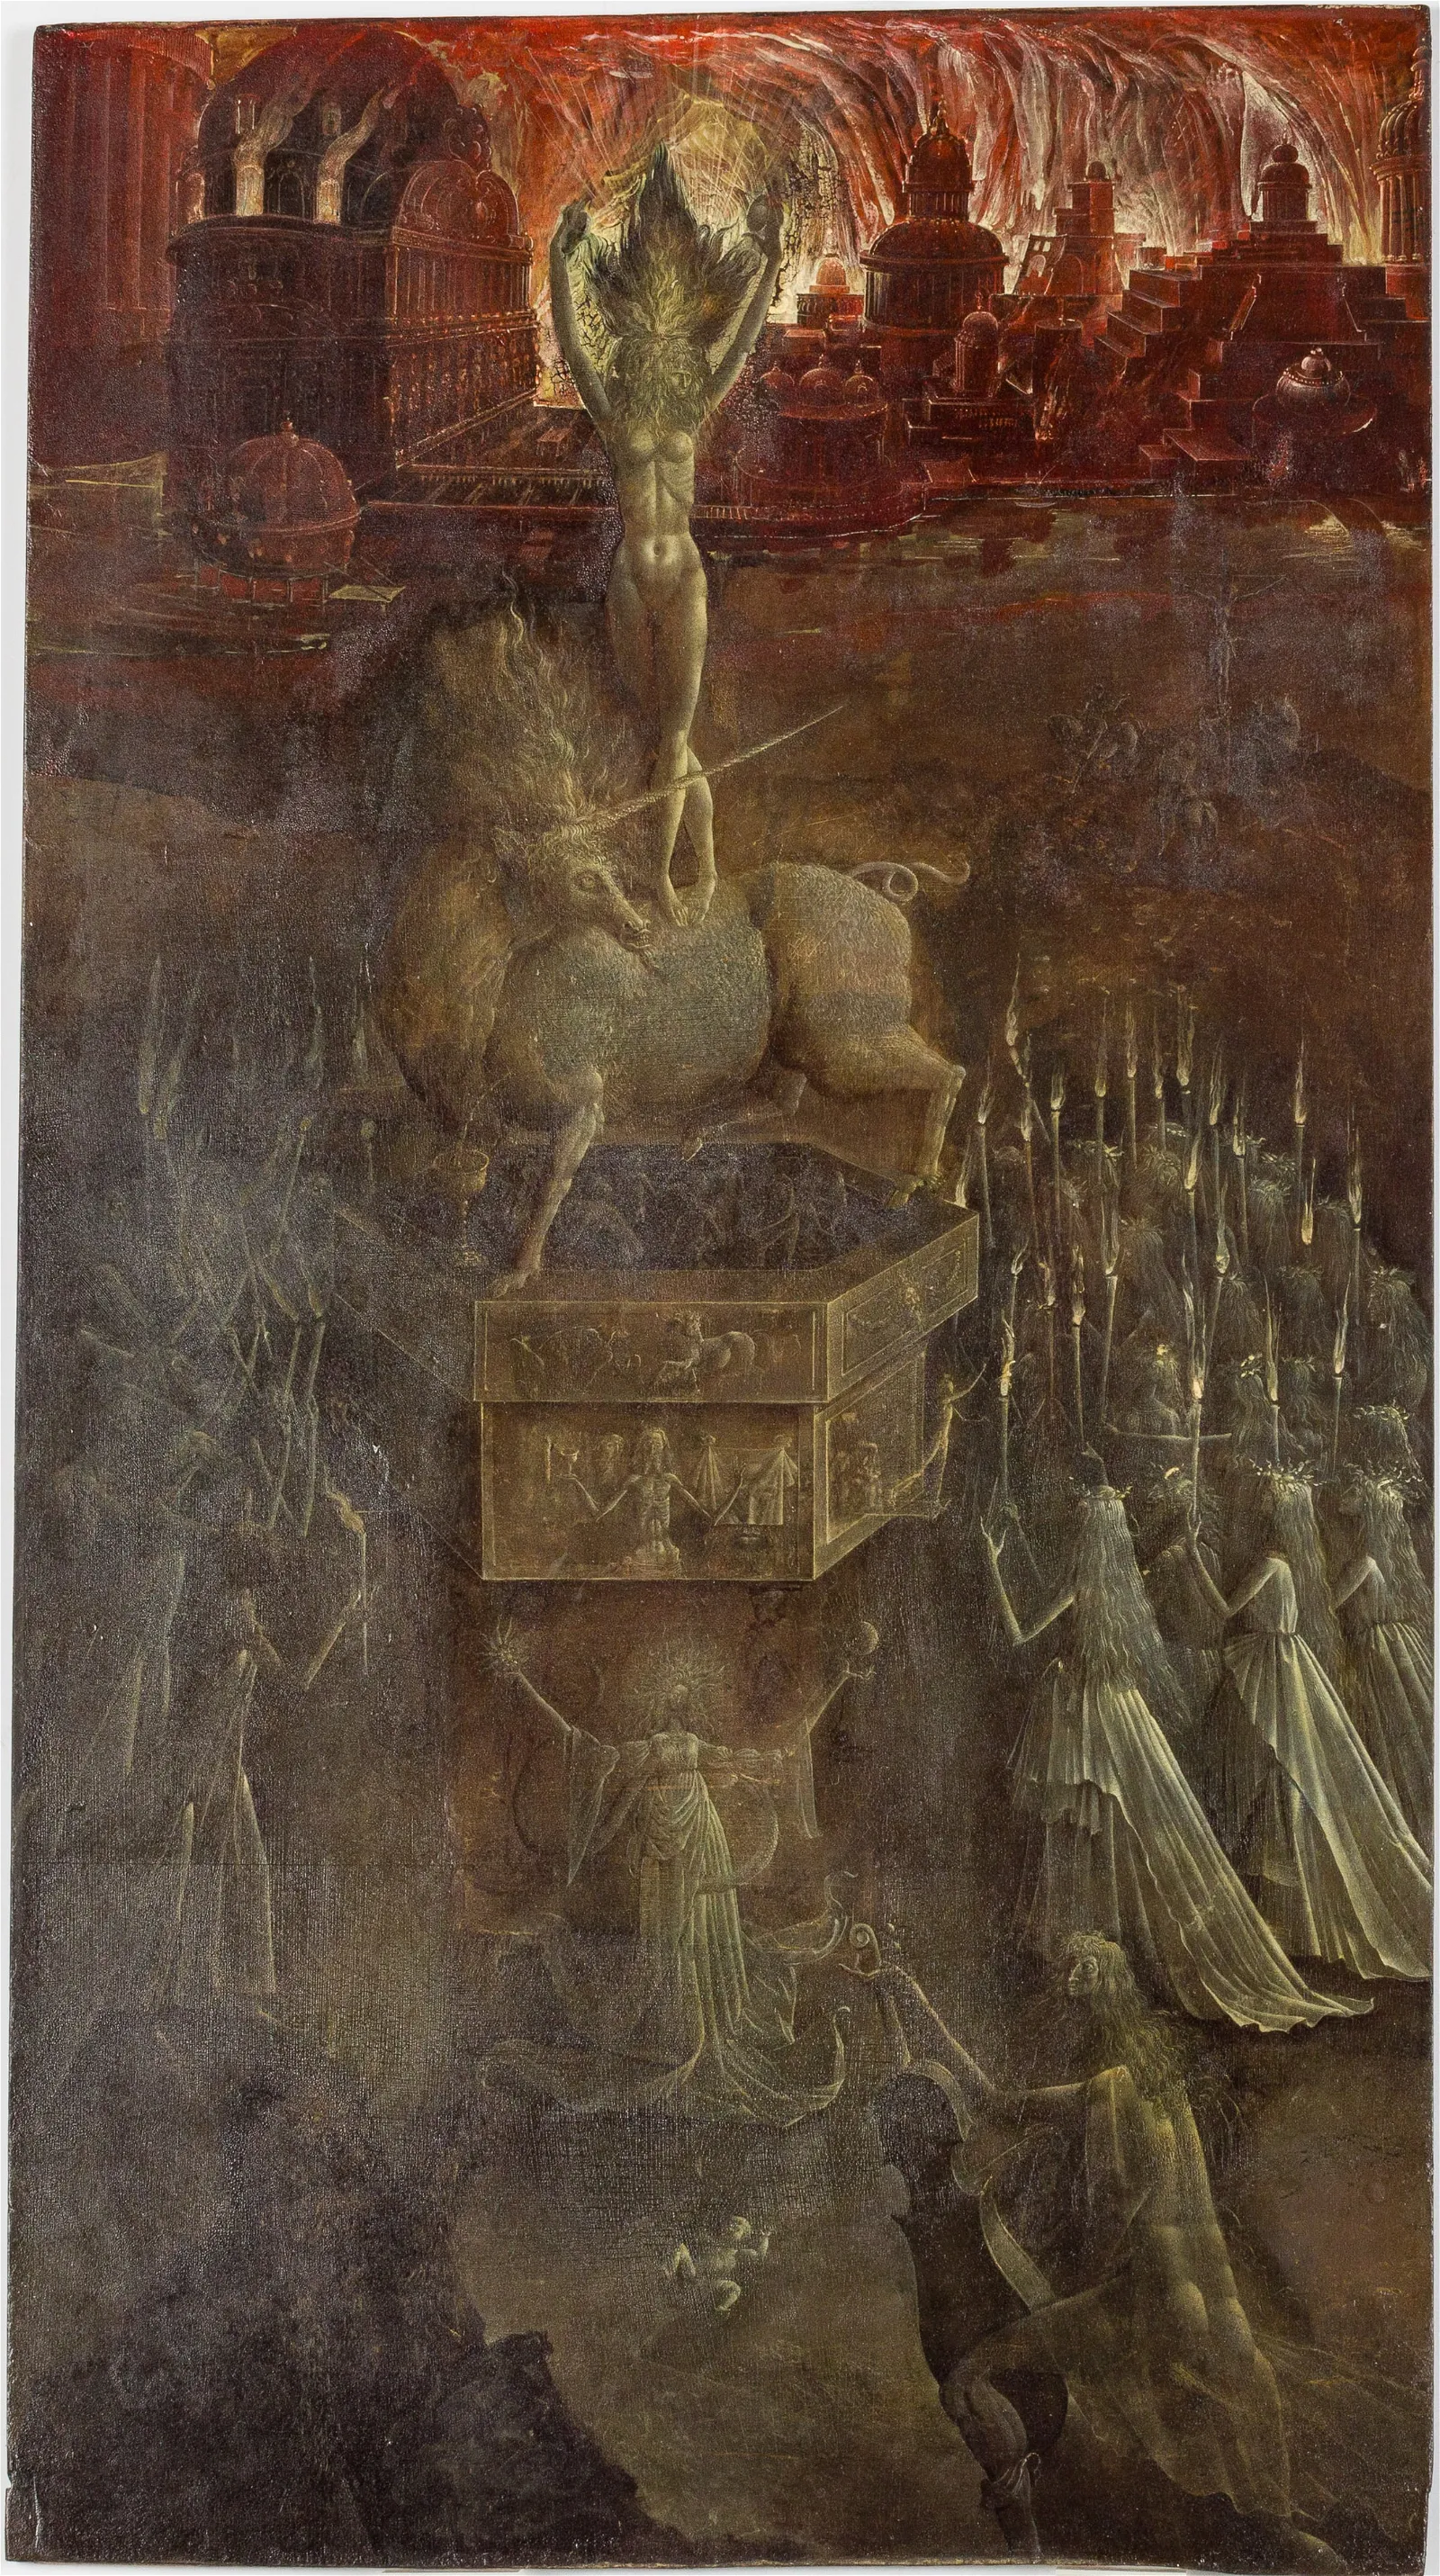 Ernst Fuchs (Austria, 1930-2015), ‘The Fall of Sodom and Gomorrah,’ oil-on-panel, 24½in x 13½in (sight). Book example illustrated in (translated) ‘Ernst Fuchs: Drawings & Graphics from the Early Creative Period’ by Friedrich Haider. Provenance: Property of Jane Tucker-Radley. Estimate: $40,000-$60,000
